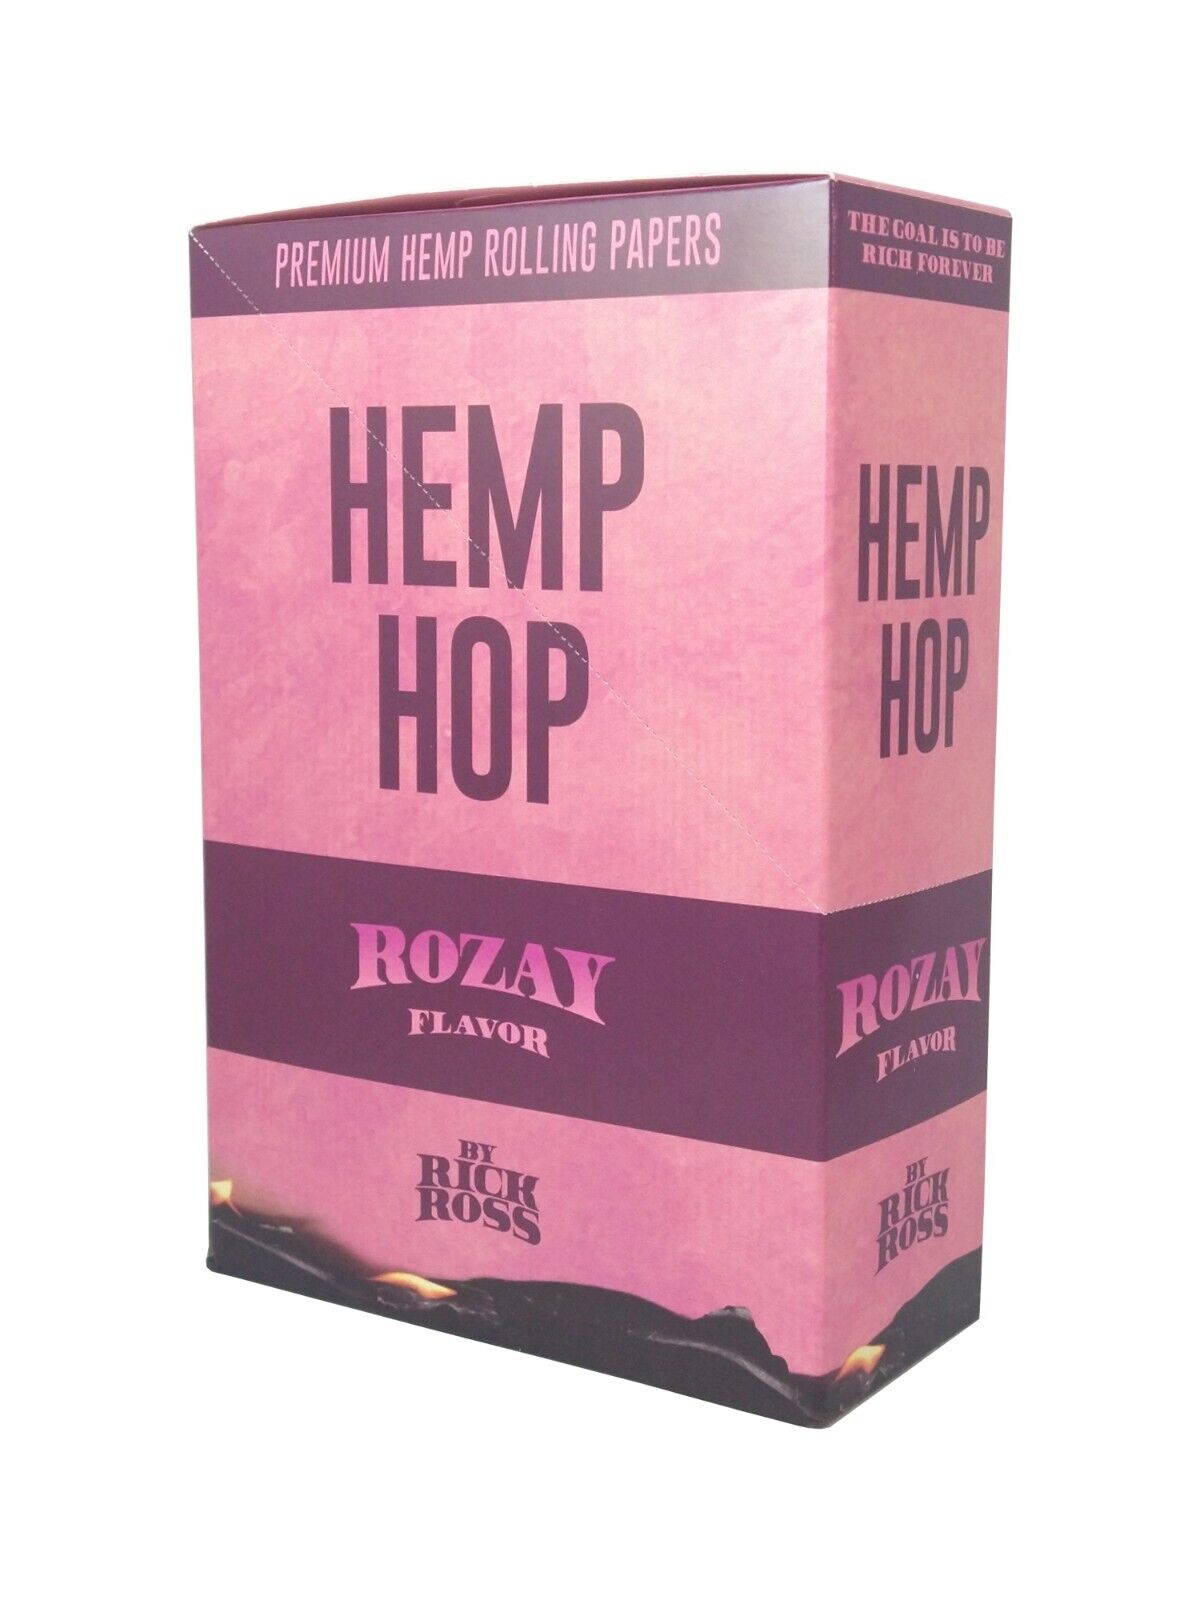 Rozay Wraps by Rick Ross (Box of 25 - 2 Packs)